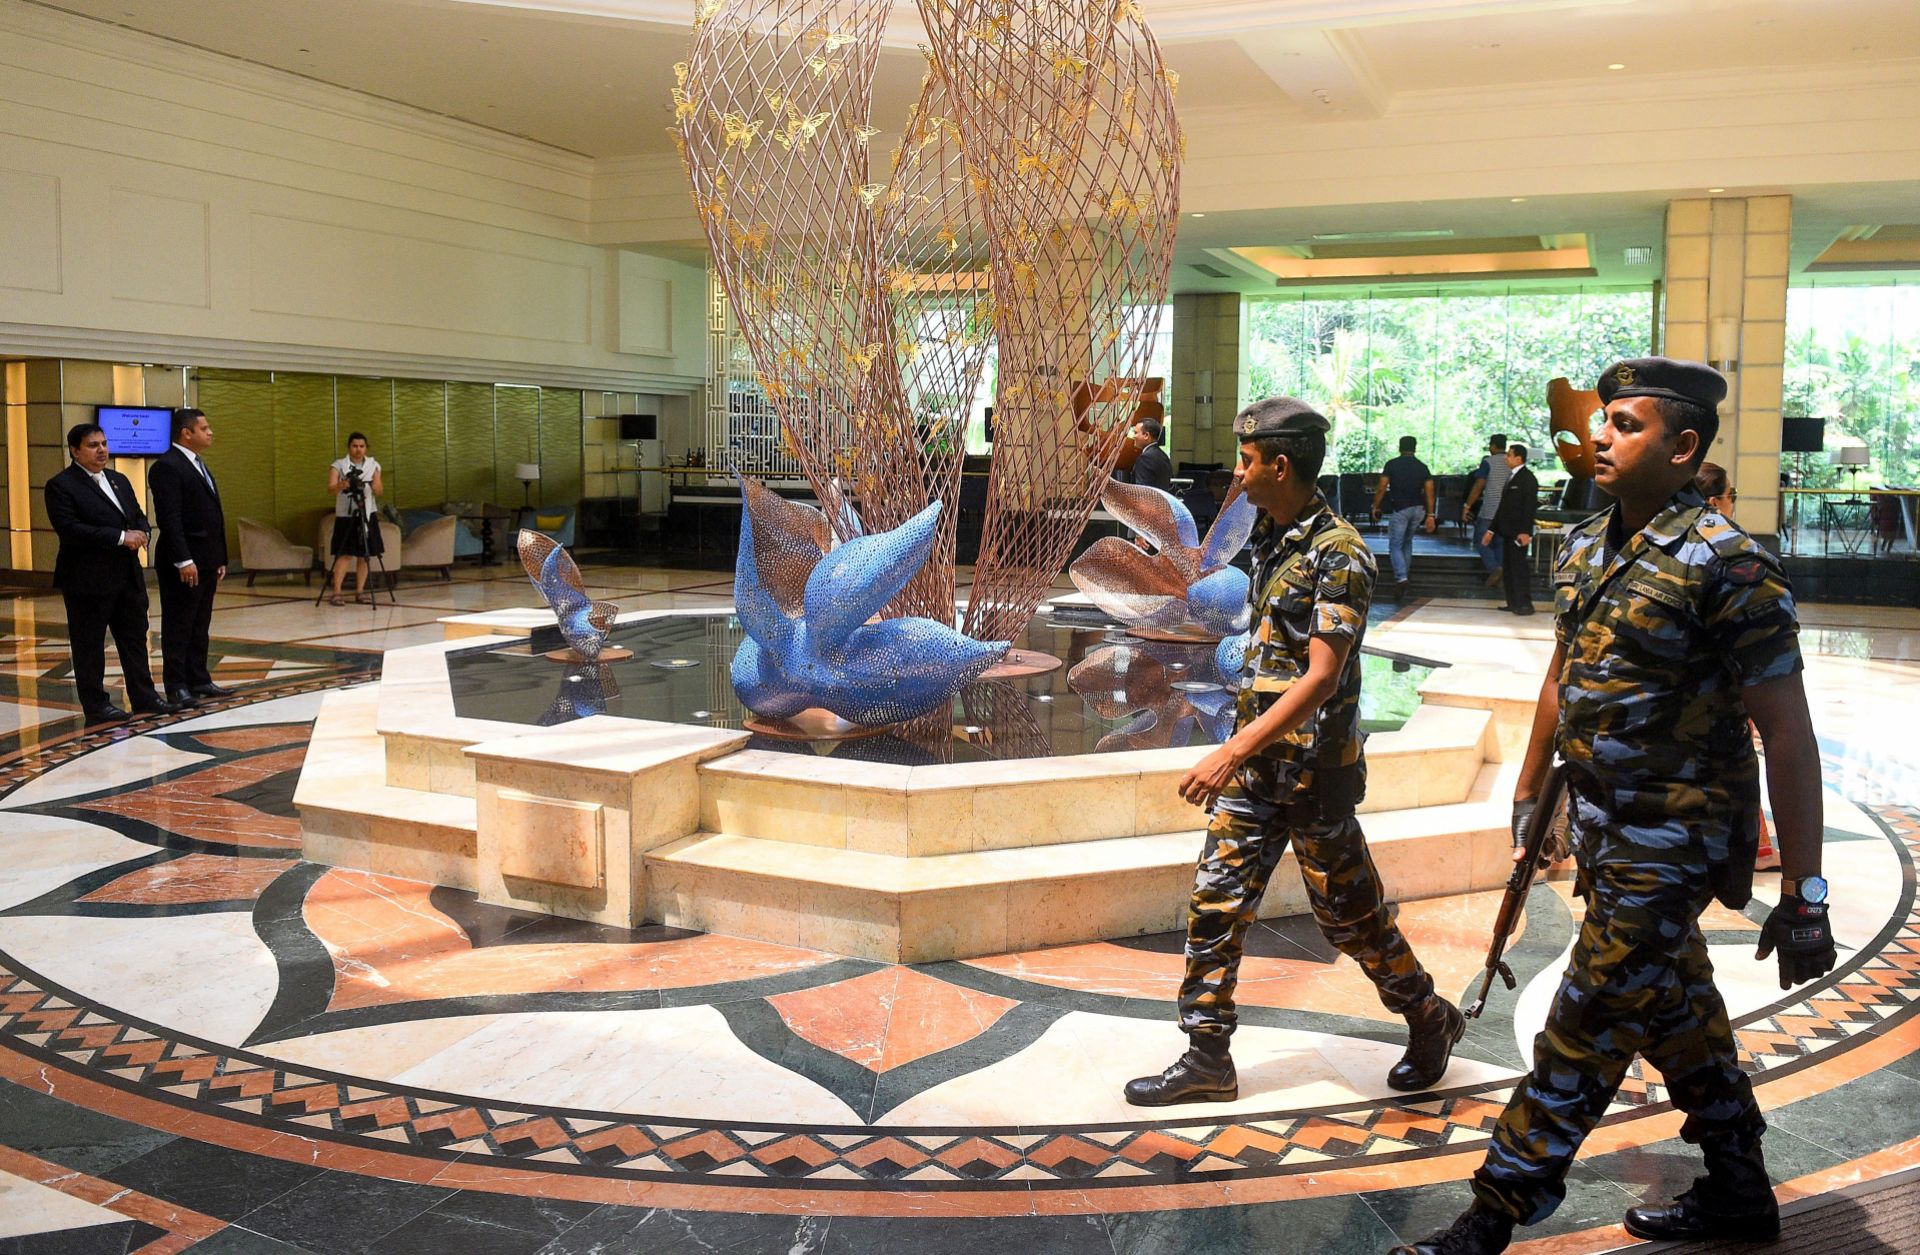 In this picture taken on May 1, 2019, Sri Lankan soldiers walk through the Cinnamon Grand Hotel lobby in Colombo. On April 21, the Cinnamon was one of three hotels hit by jihadi bombers along with three churches in attacks claimed by the Islamic State.